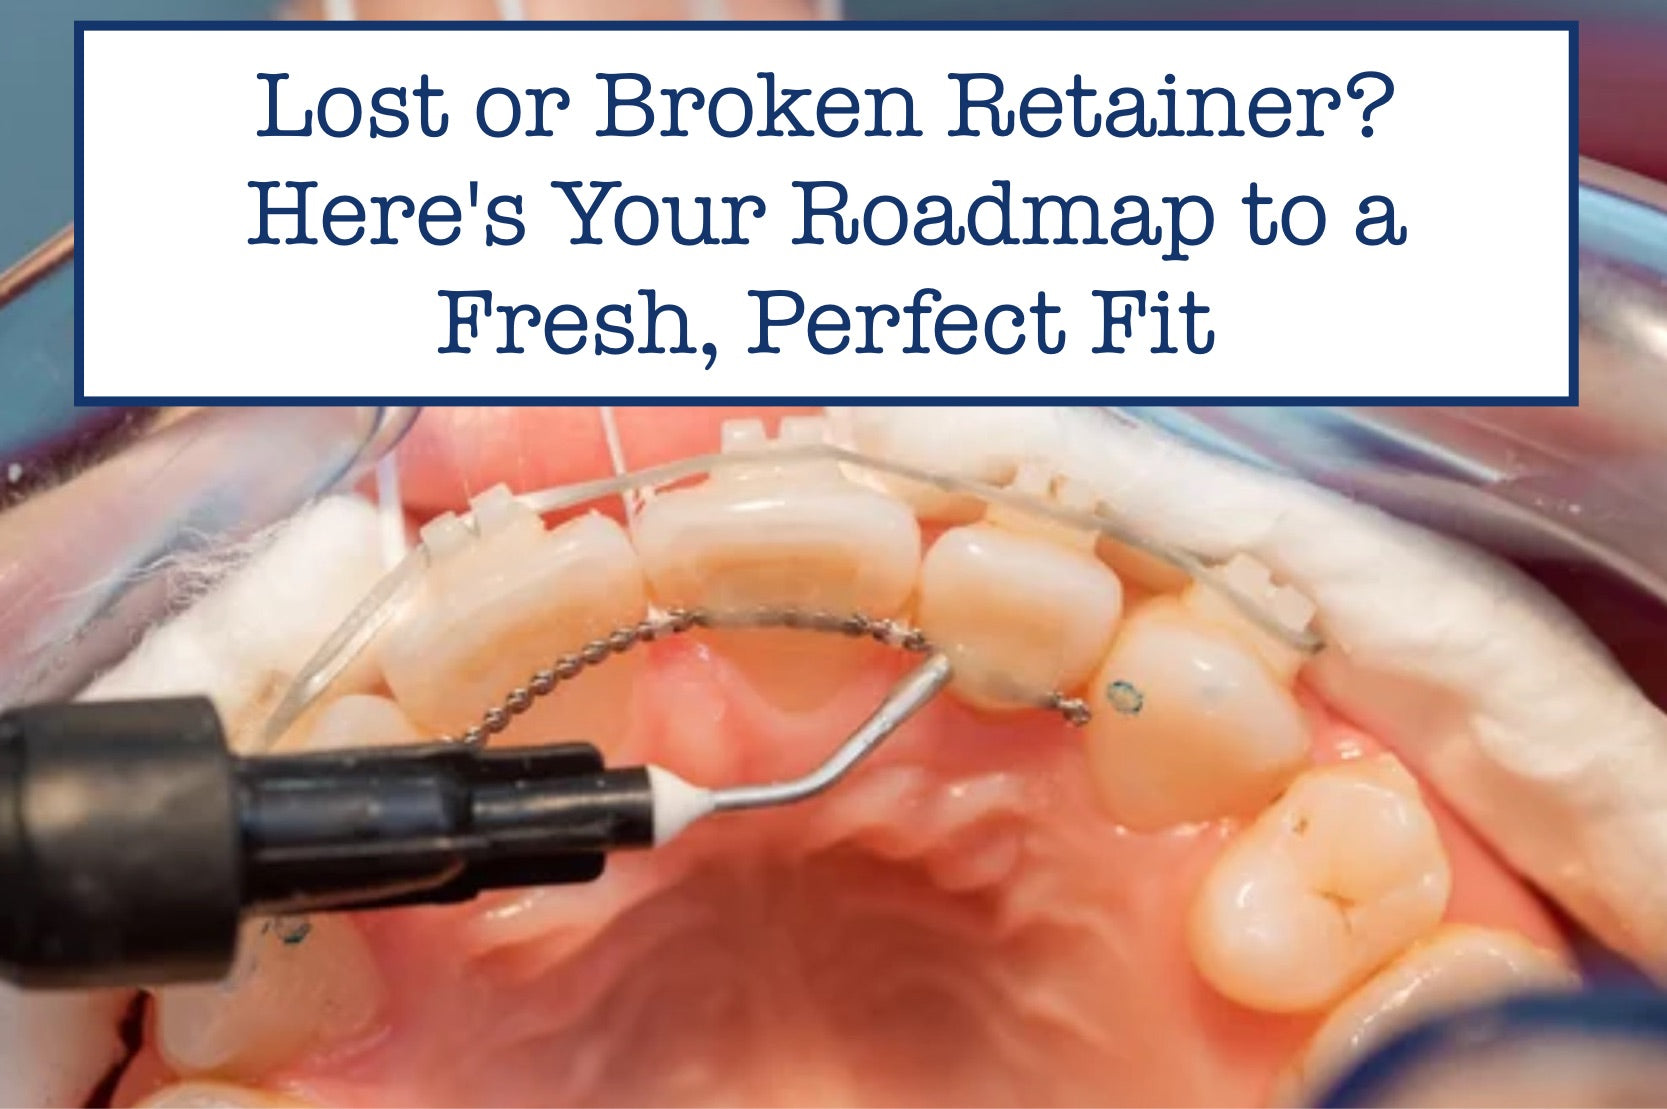 Lost or Broken Retainer? Here's Your Roadmap to a Fresh, Perfect Fit